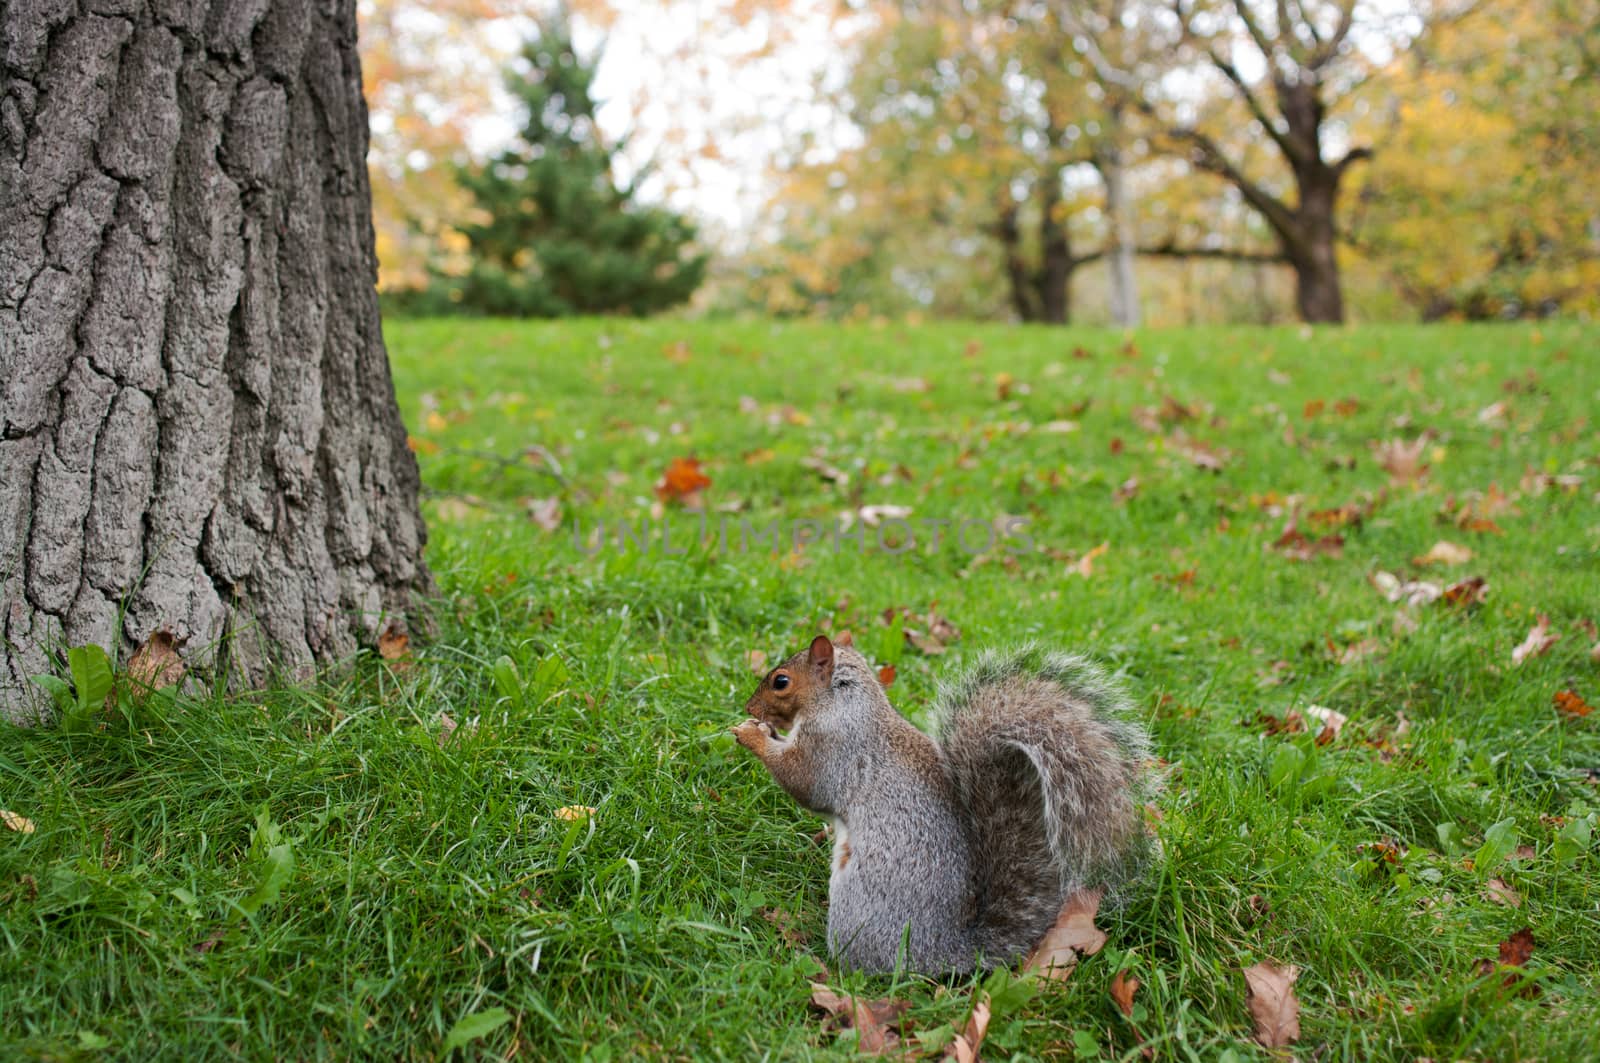 Eating squirrel sitting on the grass during an autumn day